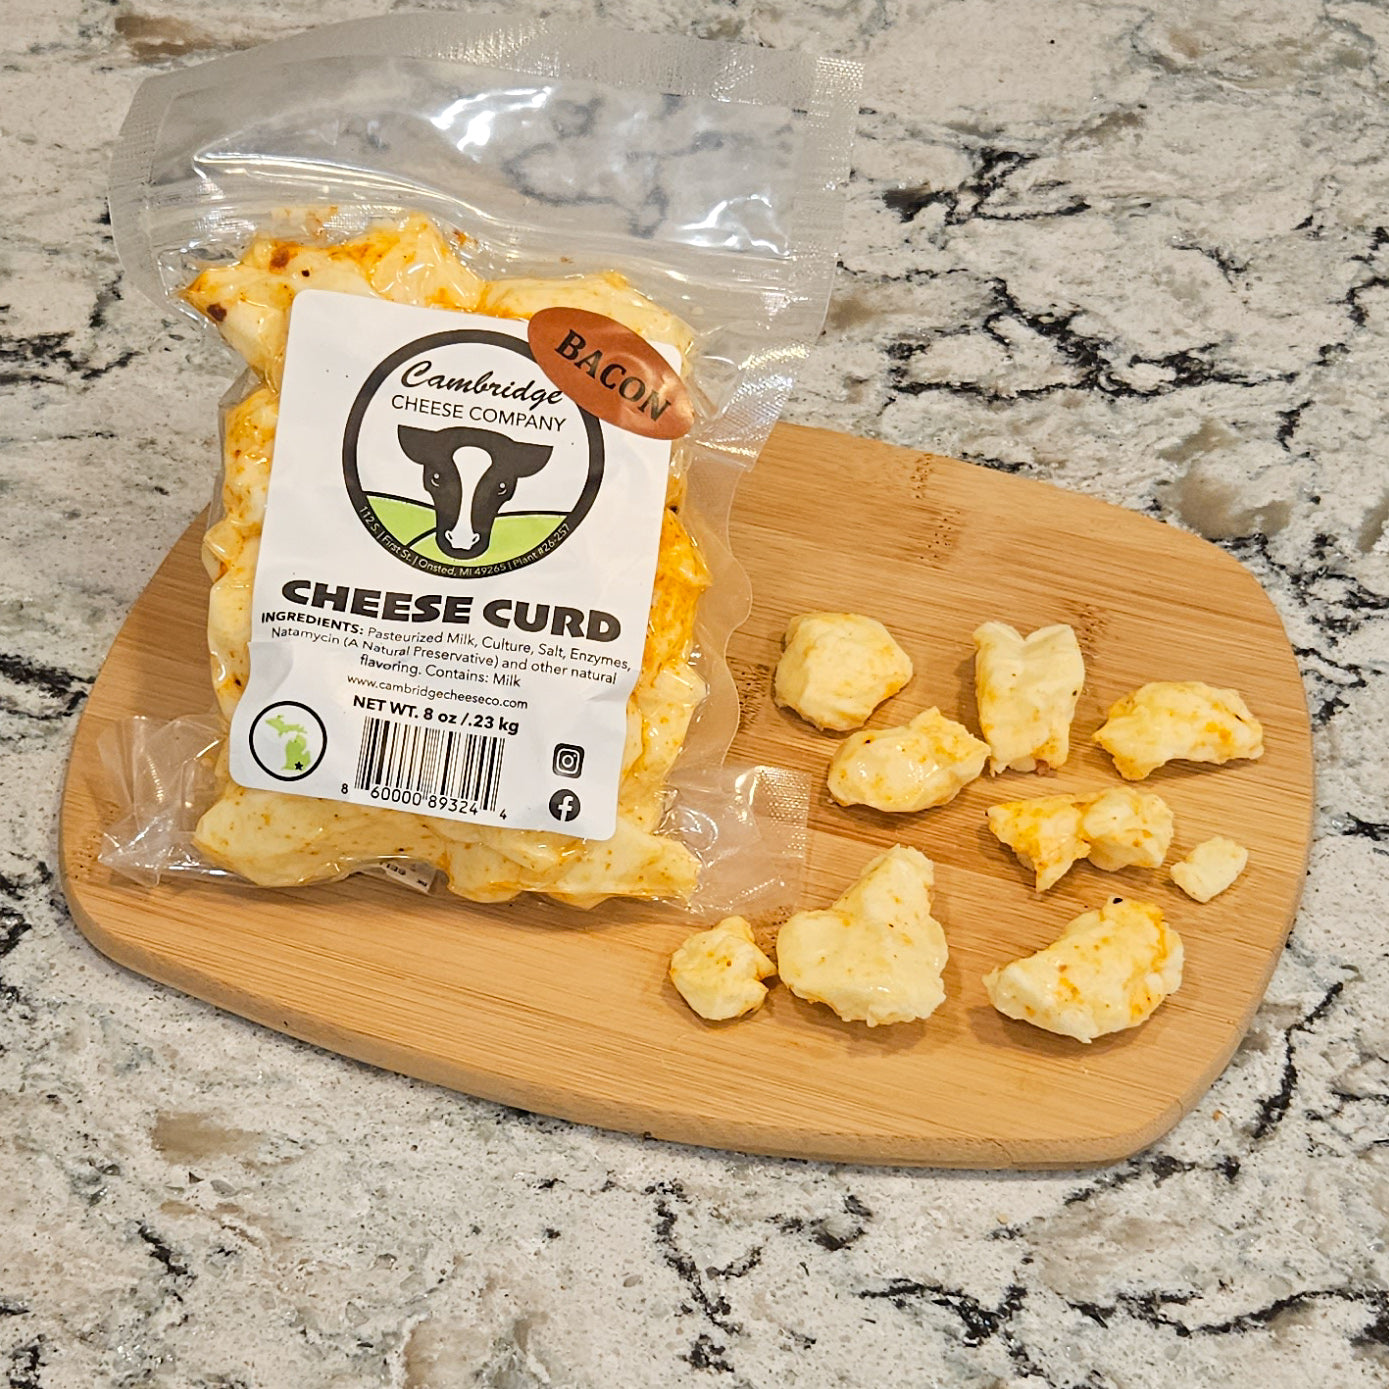 Bacon Cheese Curds